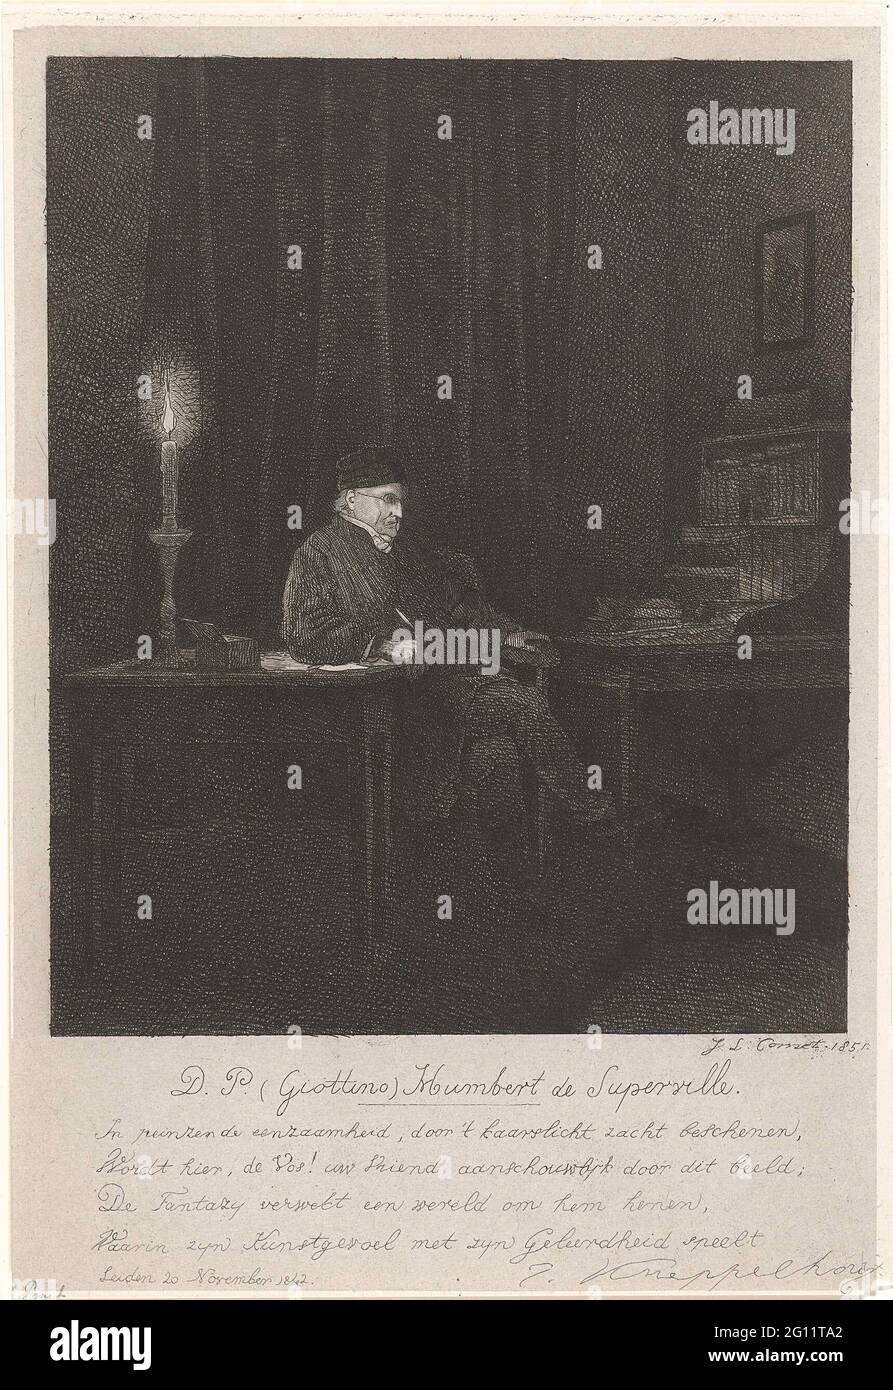 Portrait of humbert de superville. Portrait of David Pierre Giottino Humbert de Superville, an artist and art collector. Humbert de Superville is sitting at his desk. The room is only lit by a candle. The print has a Dutch caption in four verses. Stock Photo